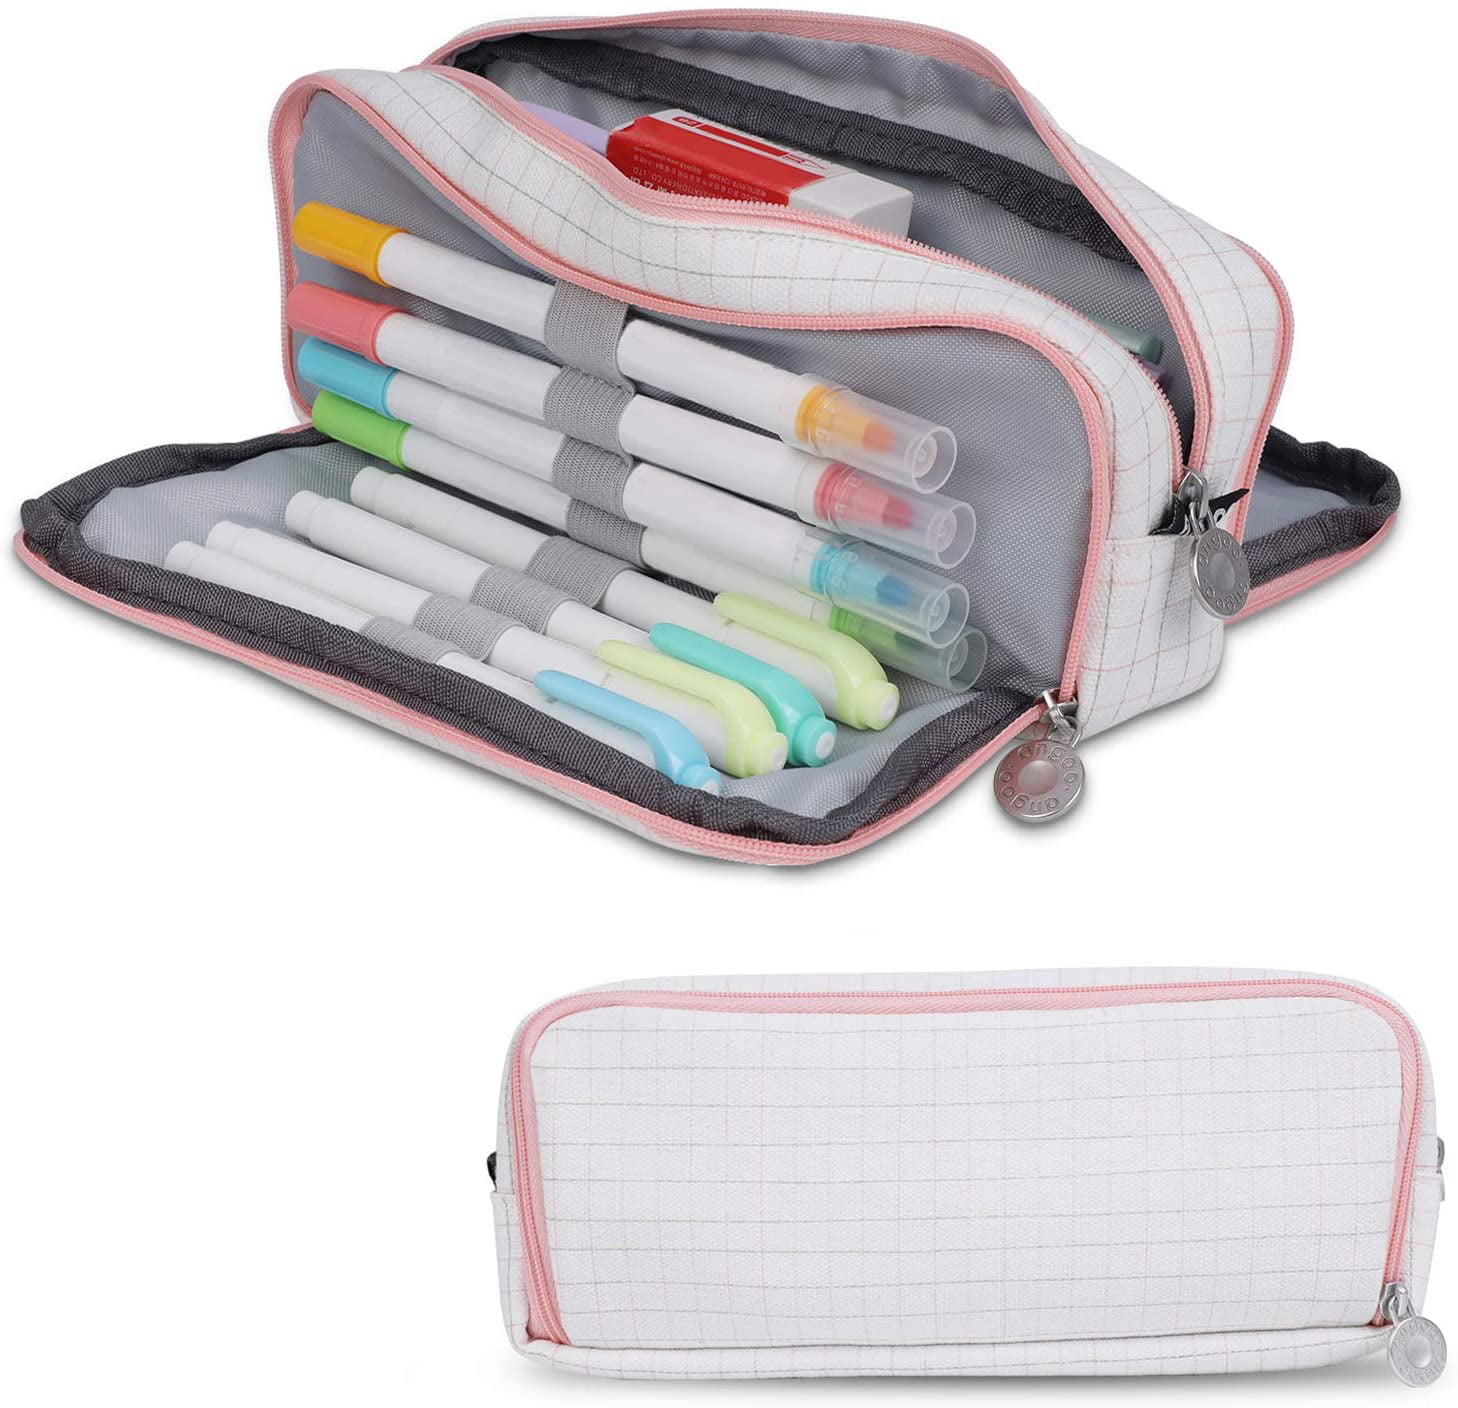 Custom Design Pencil Bag Case for School Children Students Boys Pouch Bags Gifts 